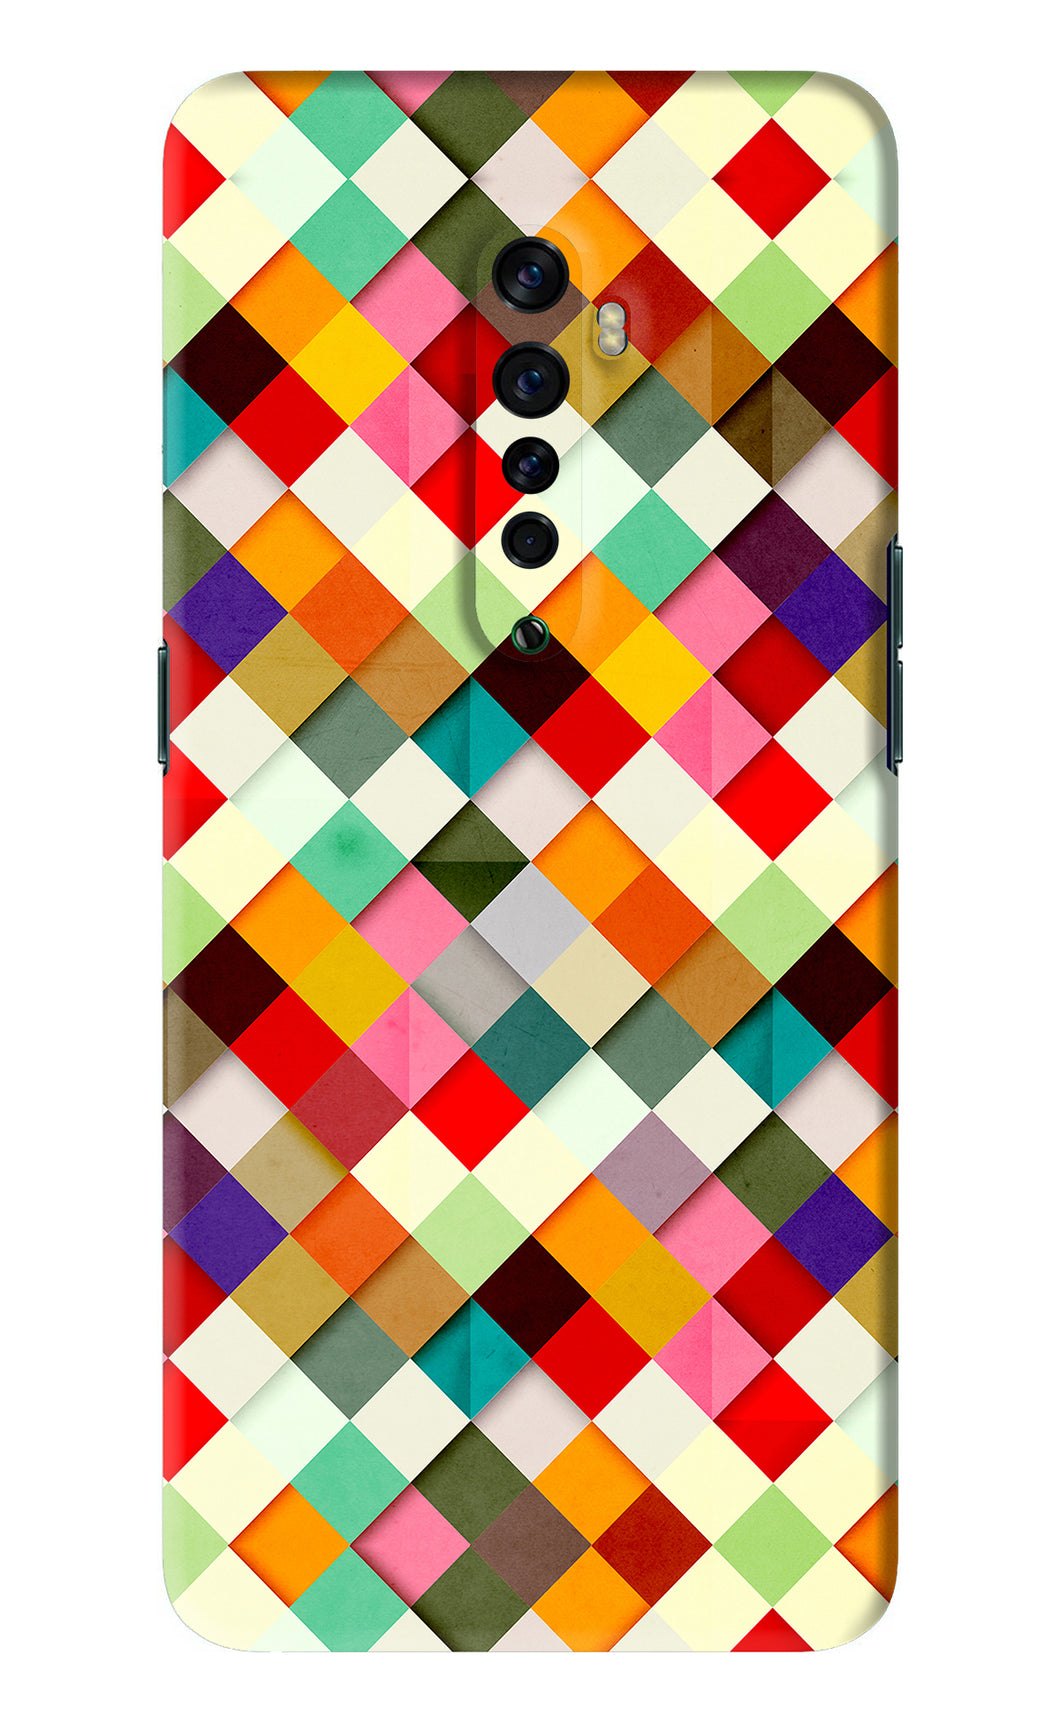 Geometric Abstract Colorful Oppo Reno 2 Back Skin Wrap